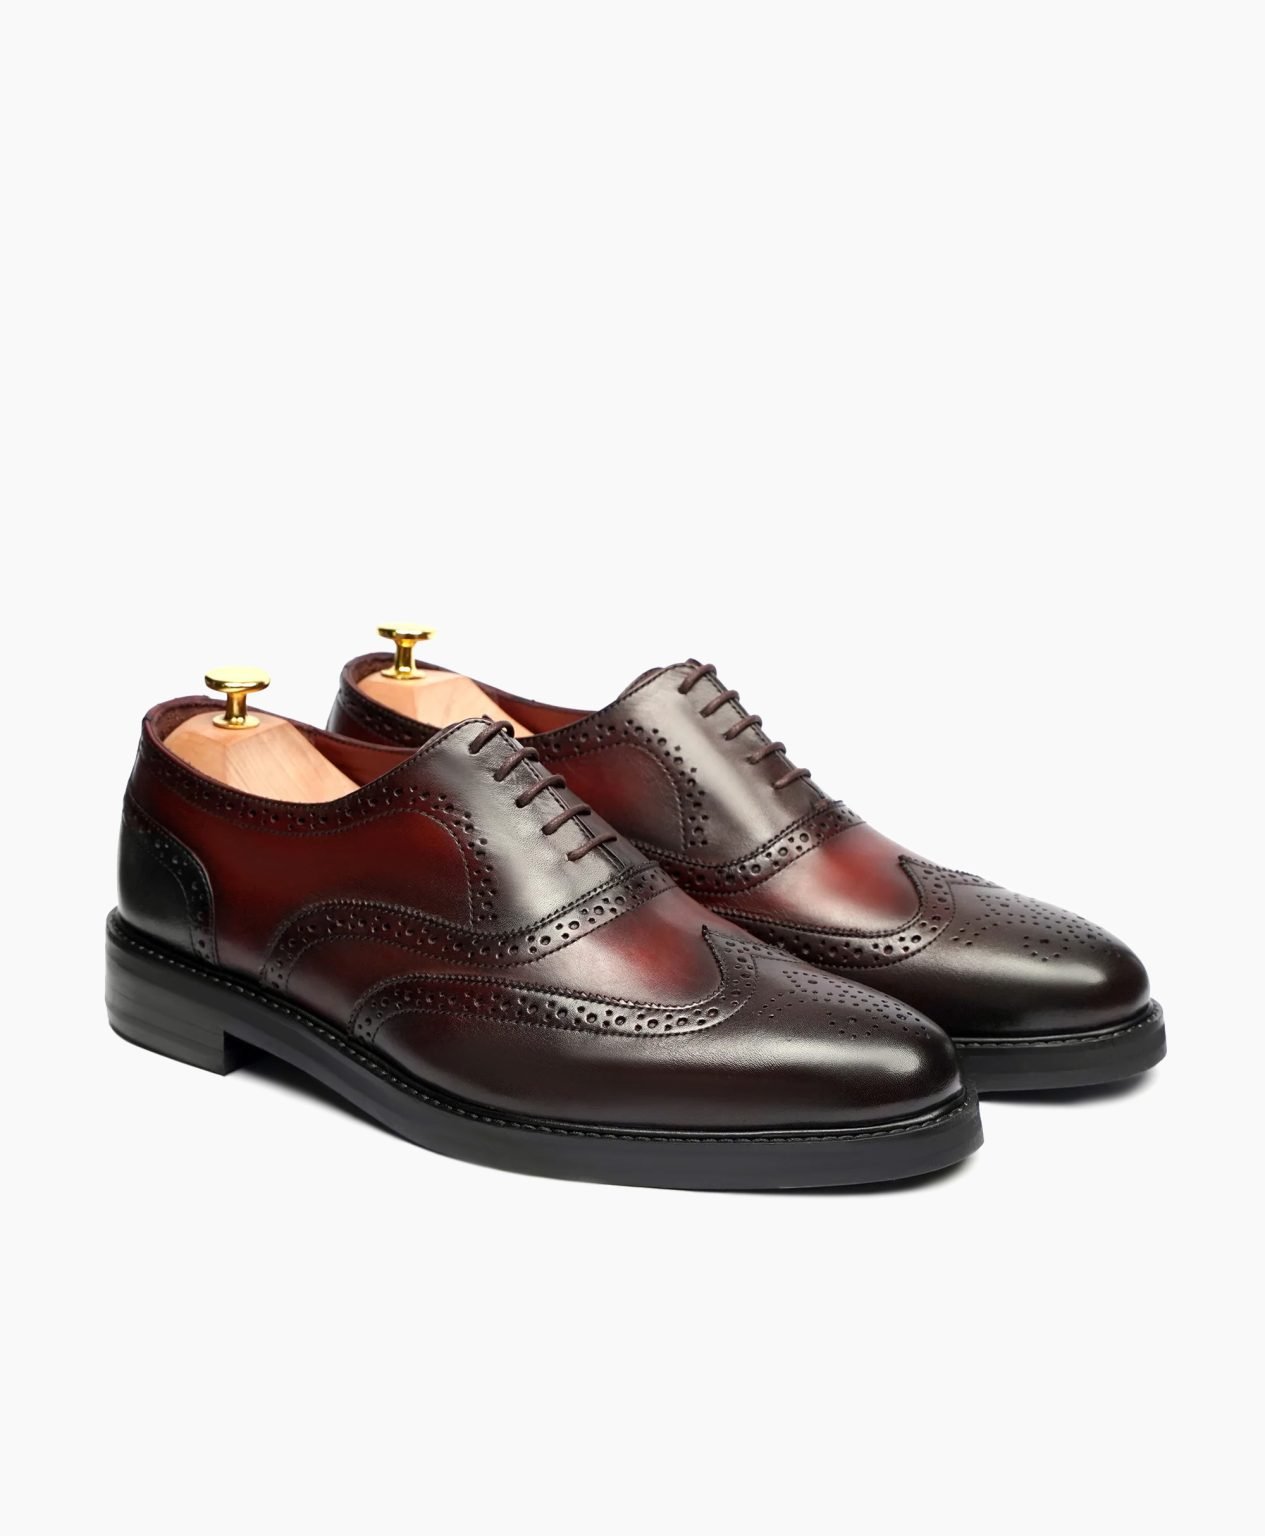 falmouth-oxford-brown-burgundy-leather-shoes-image200